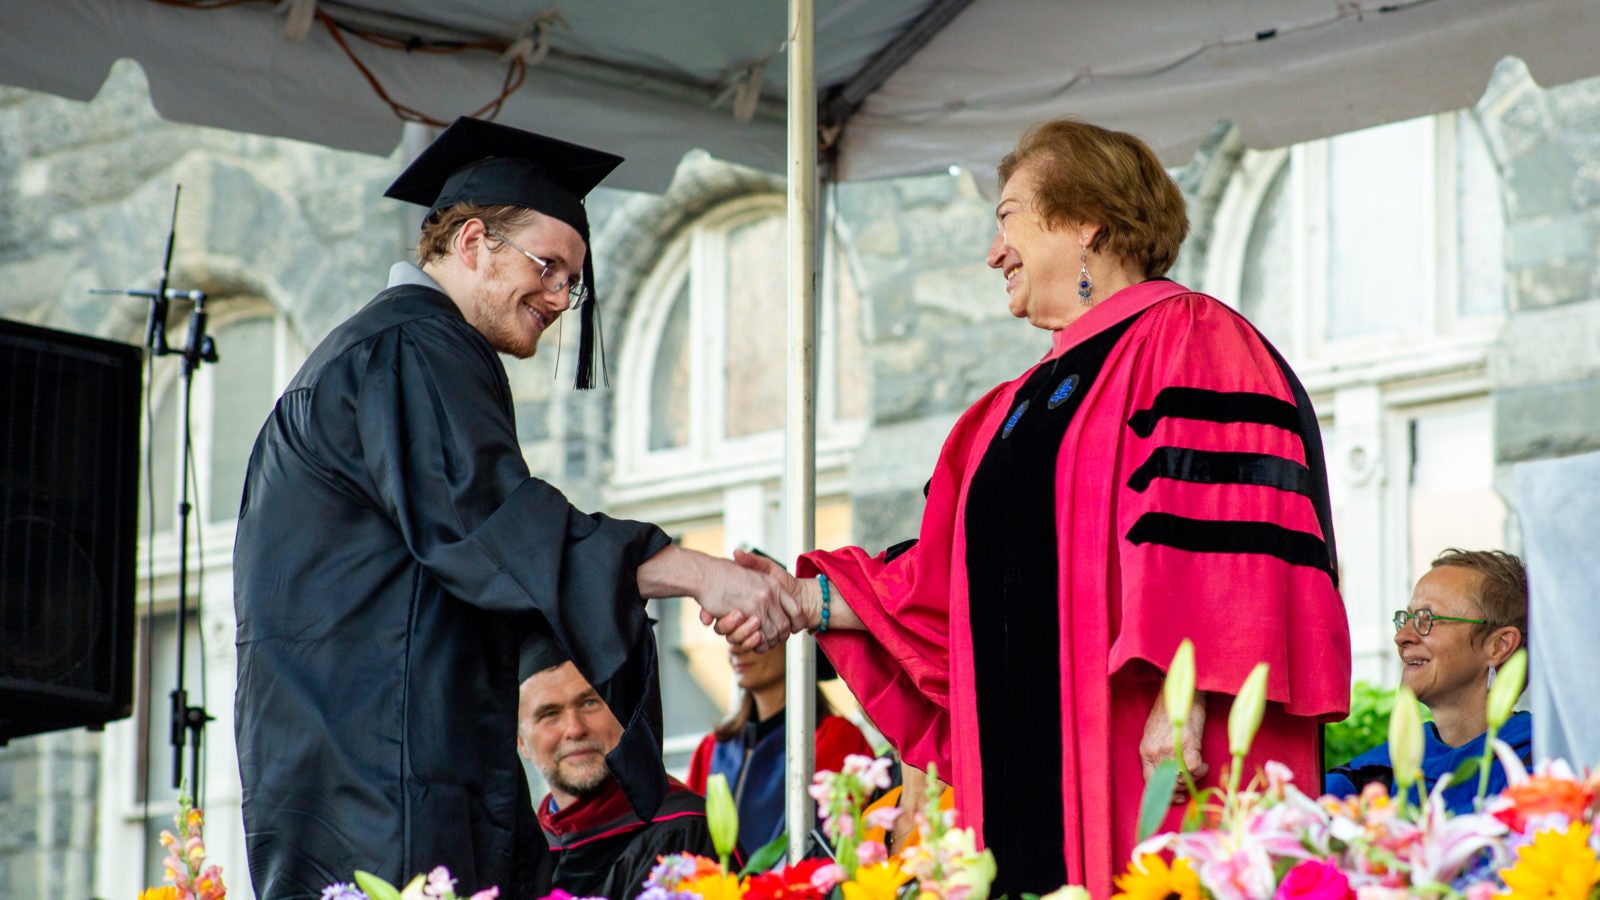 Graduate shaking hands with staff